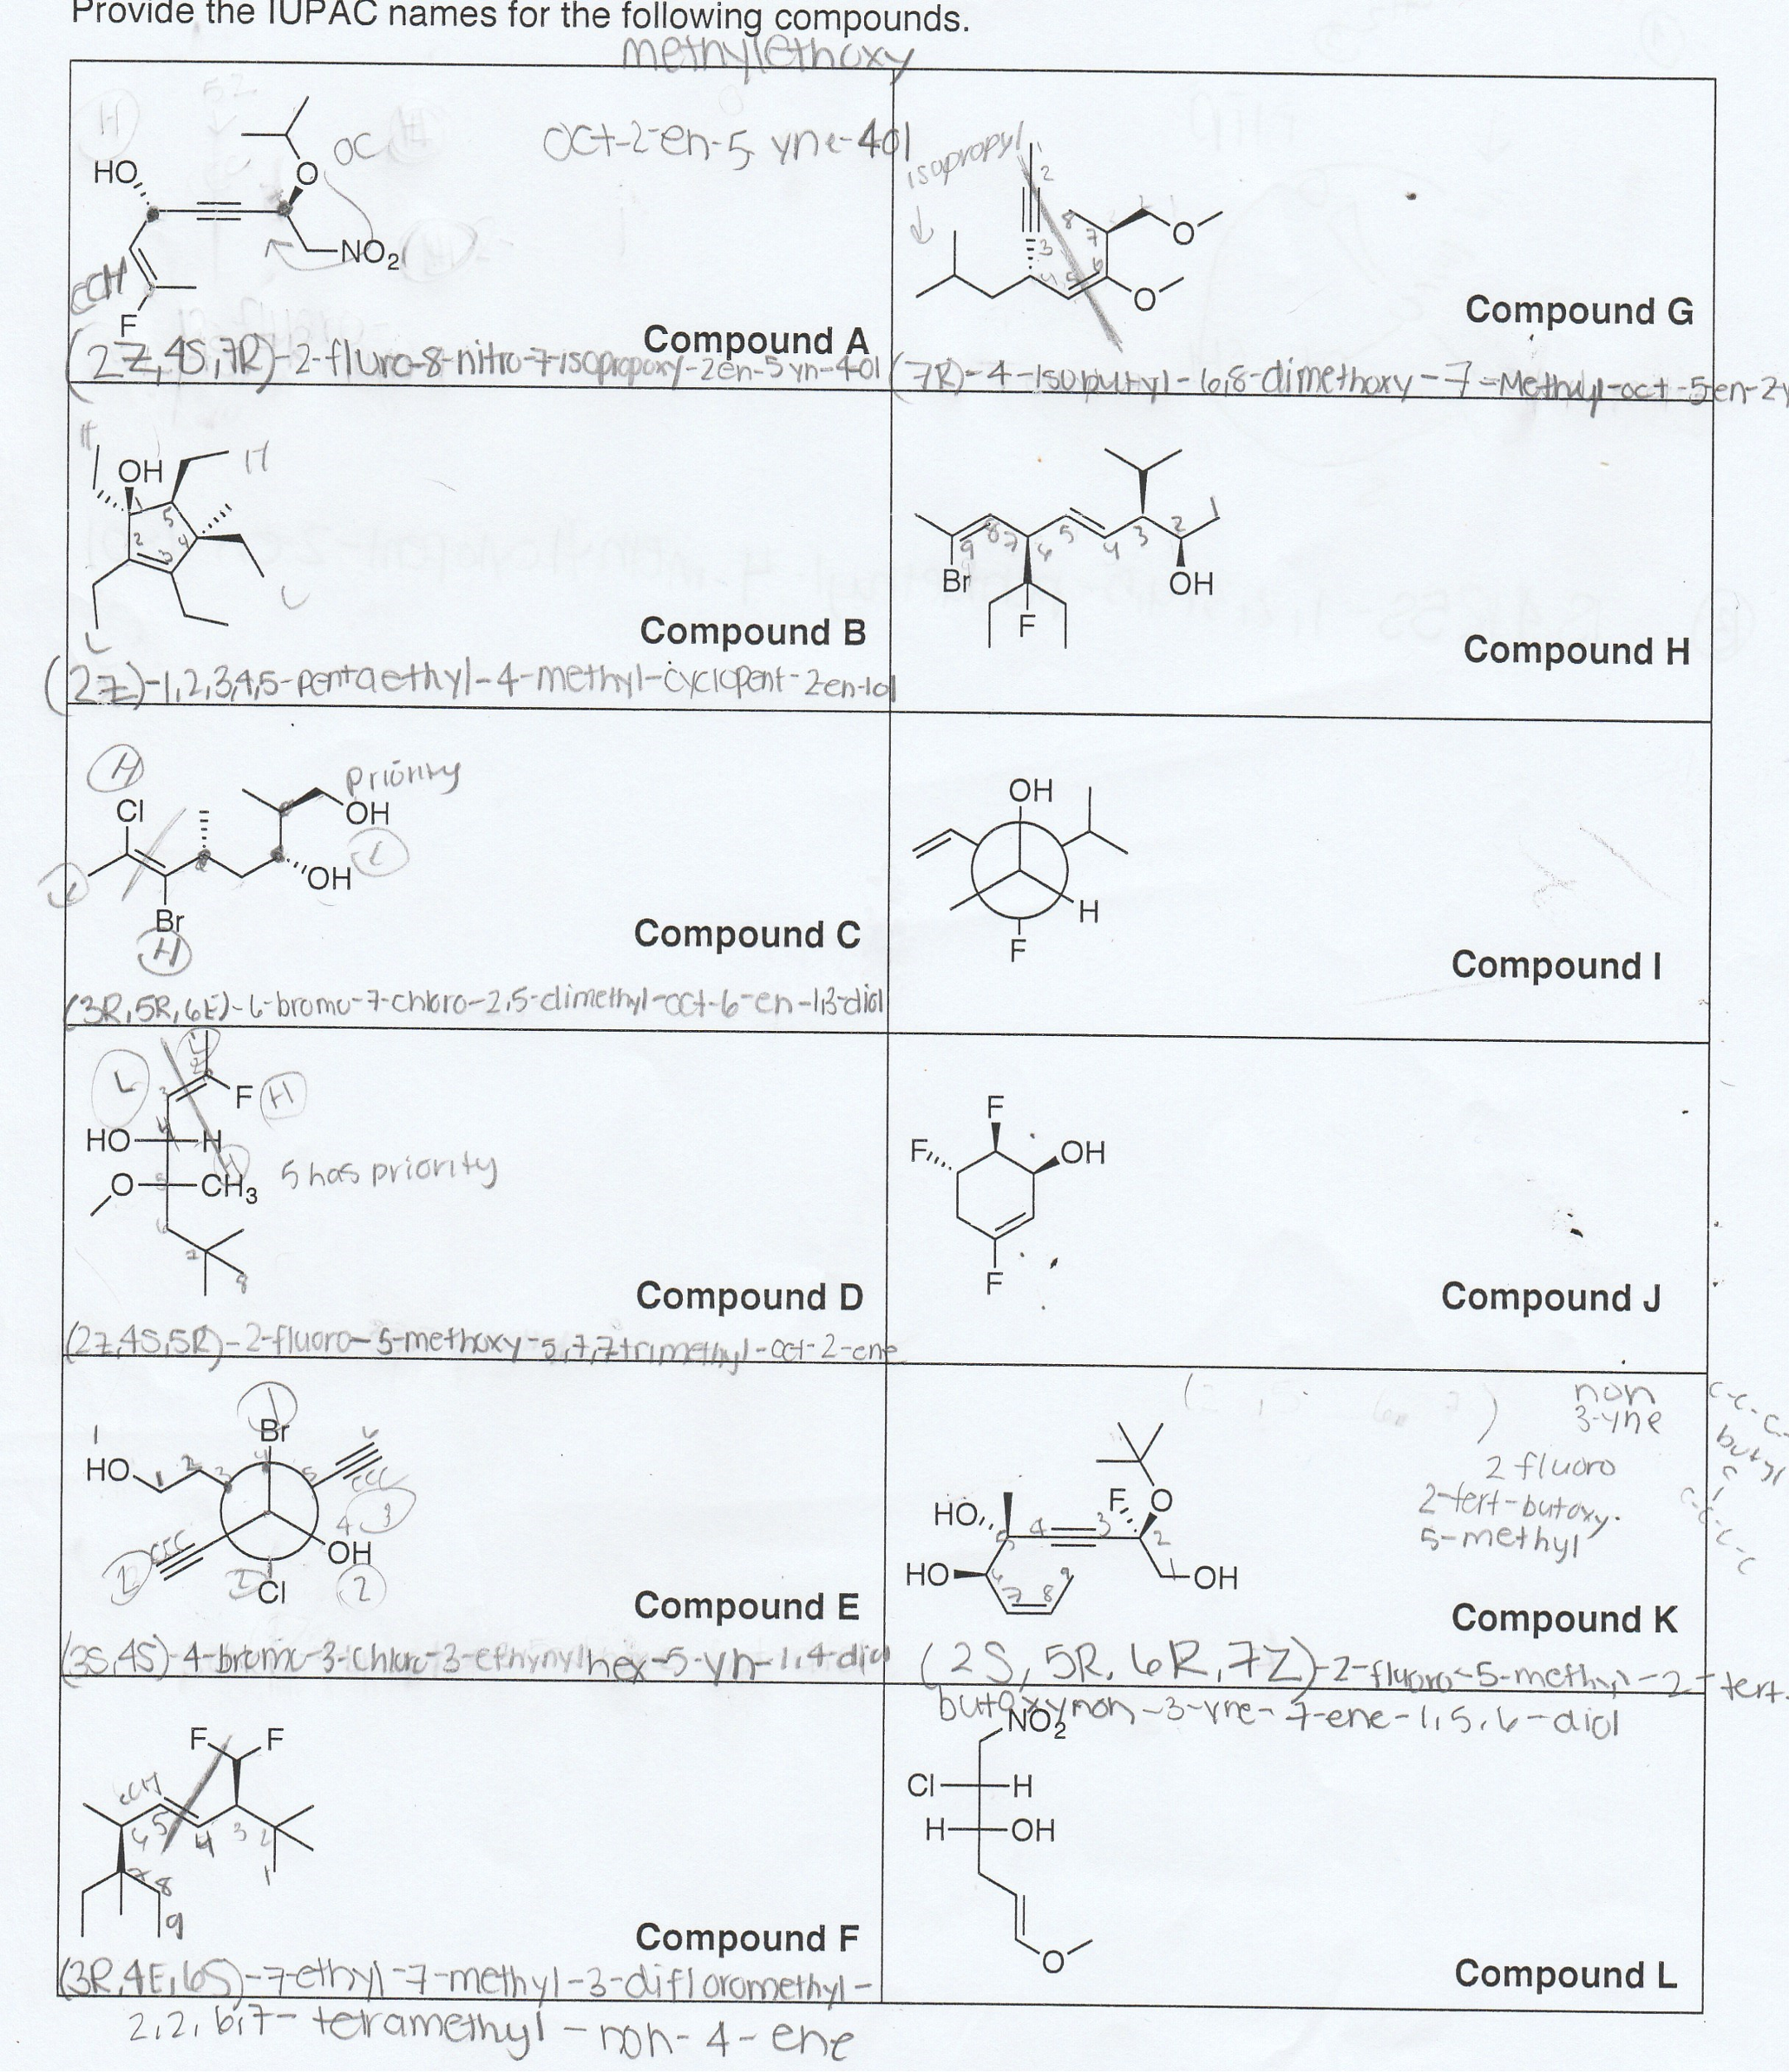 What Is The Iupac Name For The Following Compound Programmaticagc